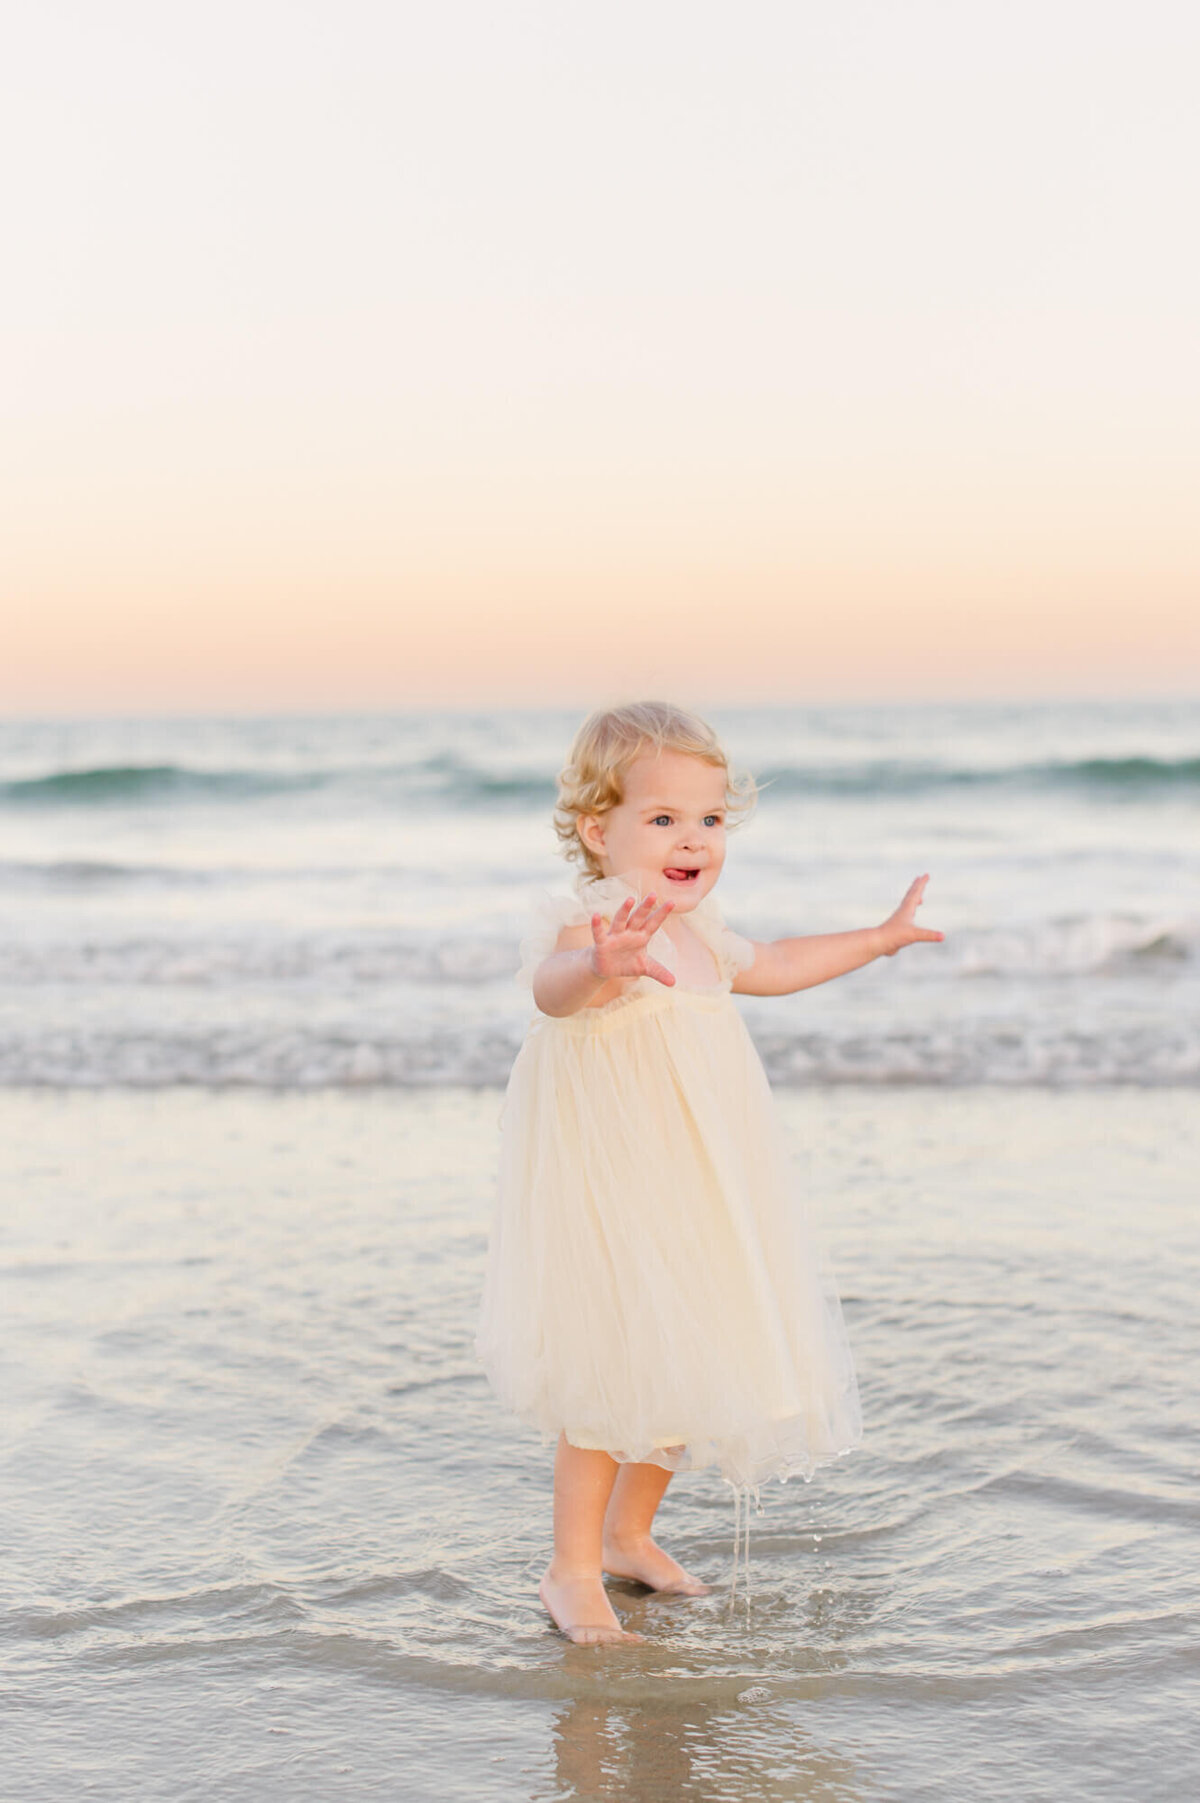 Young toddler girl plays in the ocean waves at the end of their maternity photo session